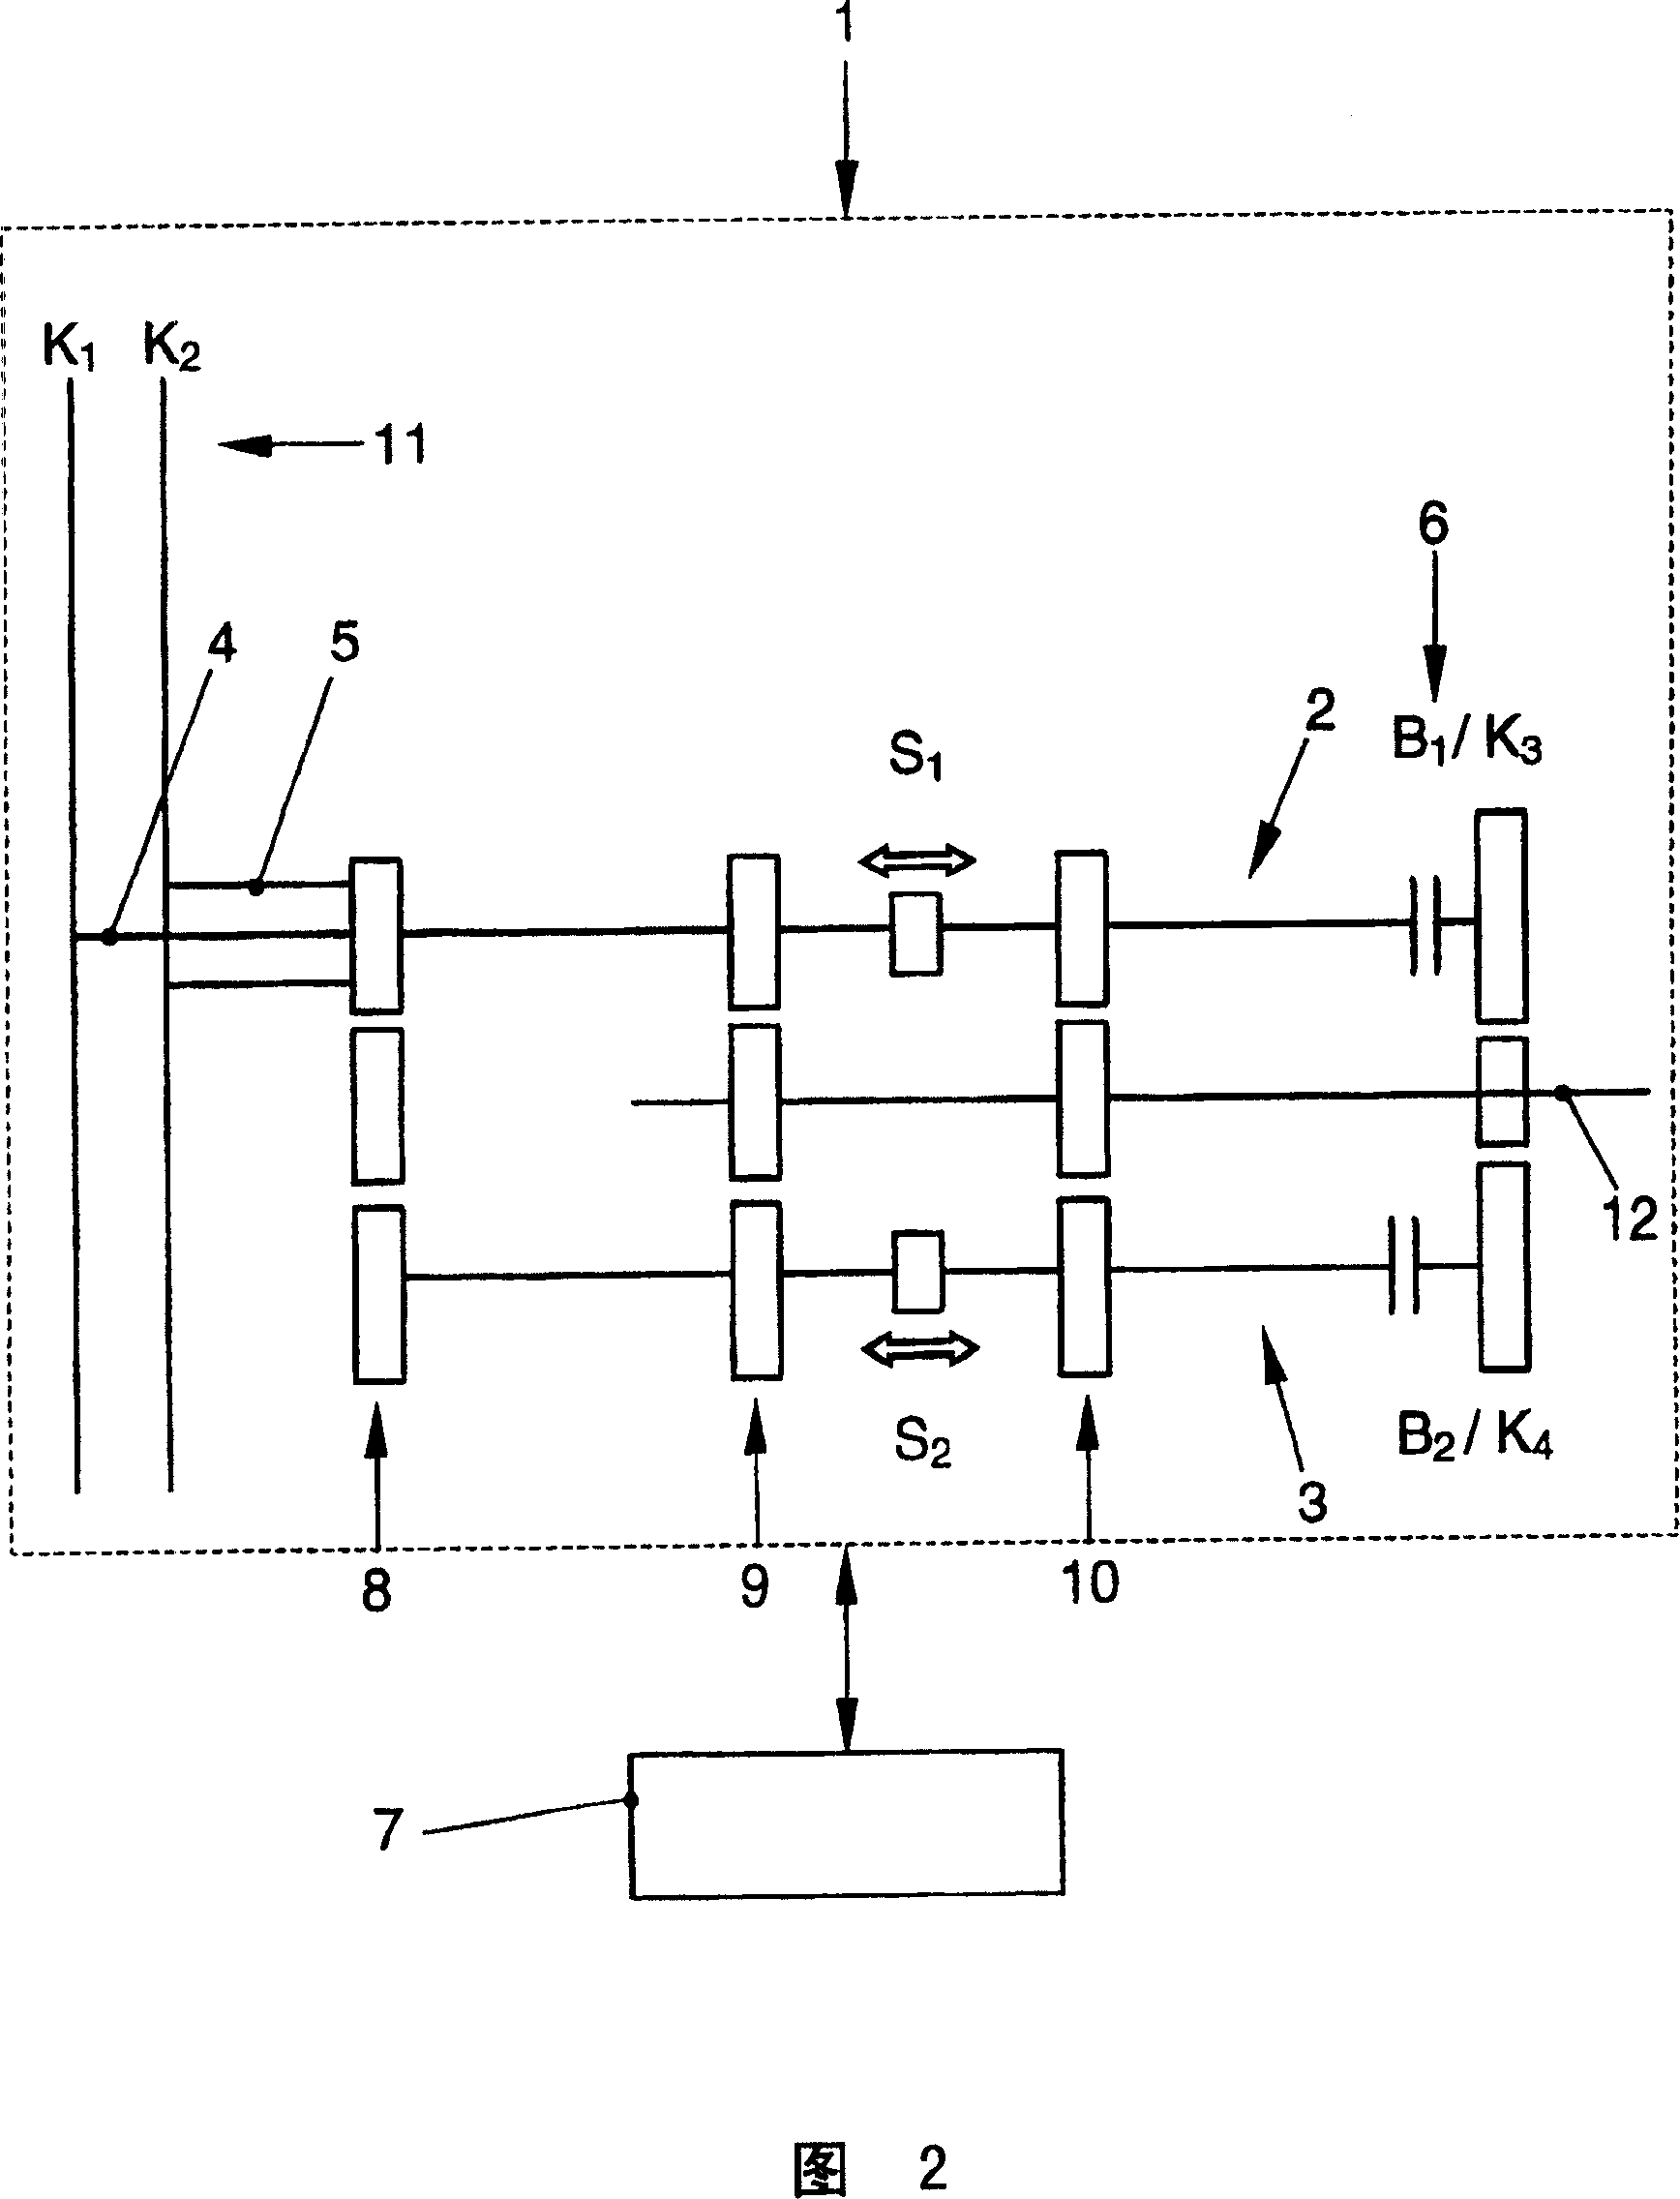 Synchronous device for double clutch speed variator